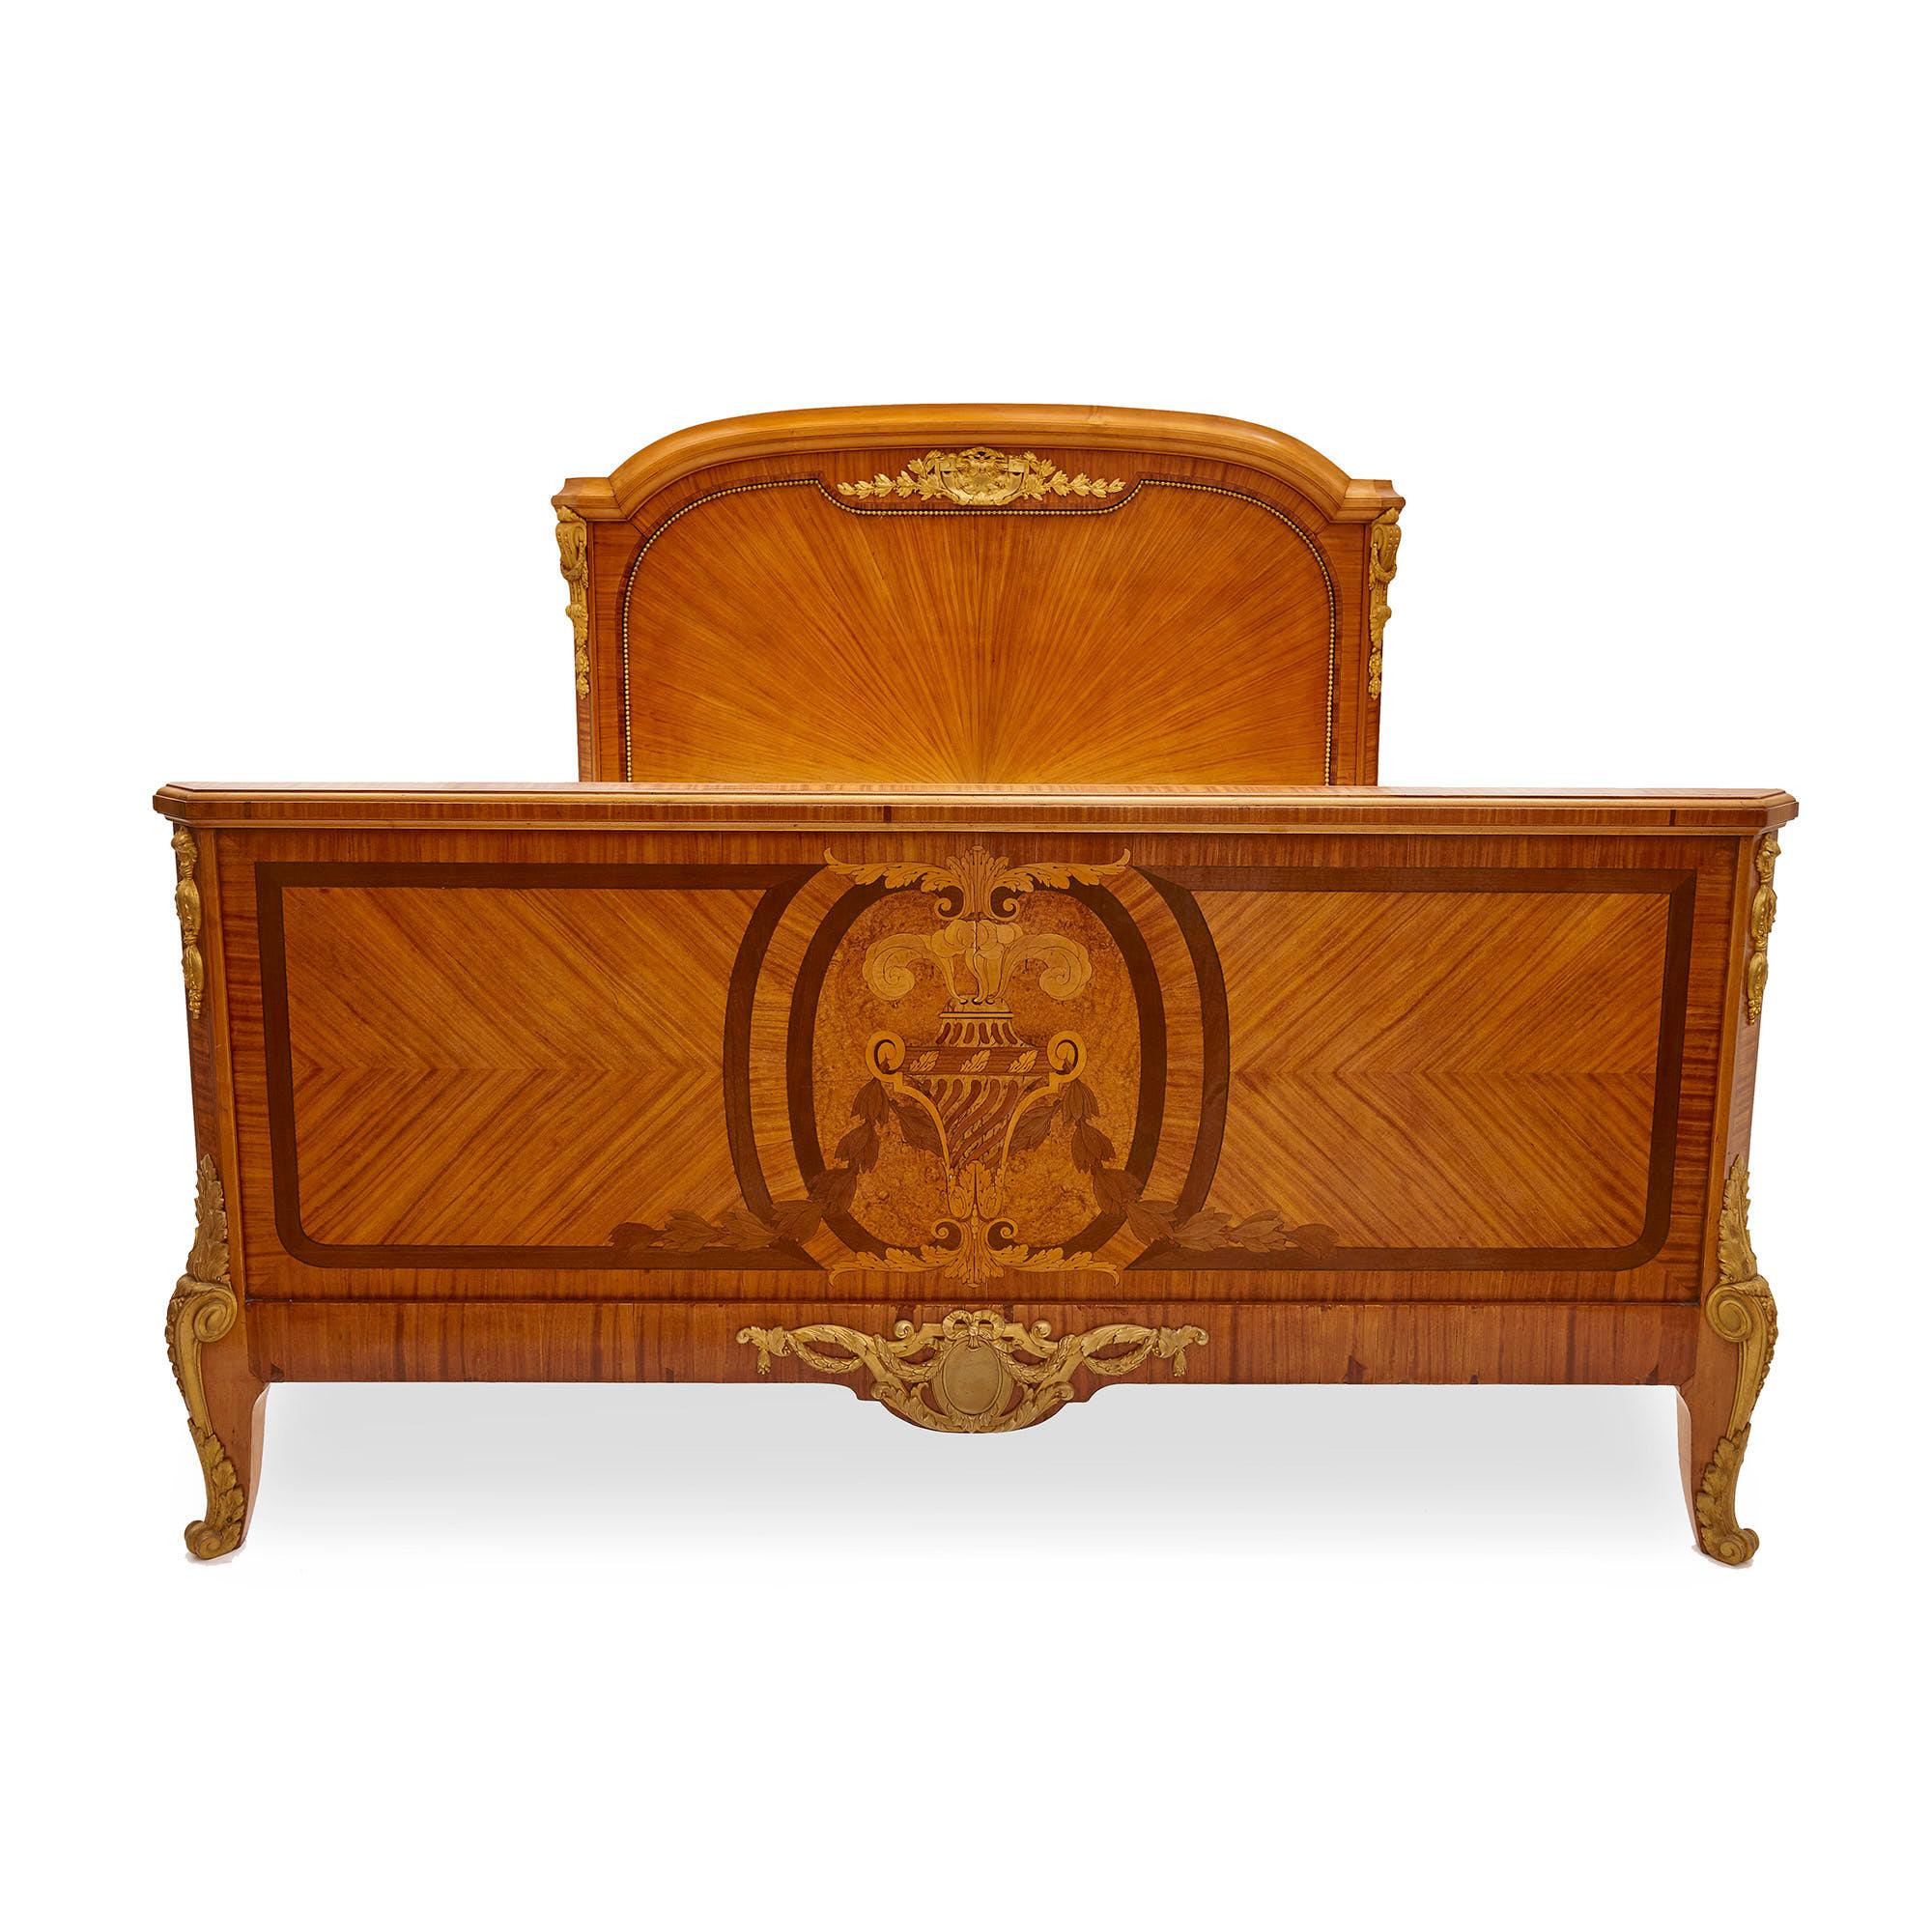 Neoclassical Antique Parisian Marquetry and Gilt Bronze Bed by Au Gros Chêne For Sale